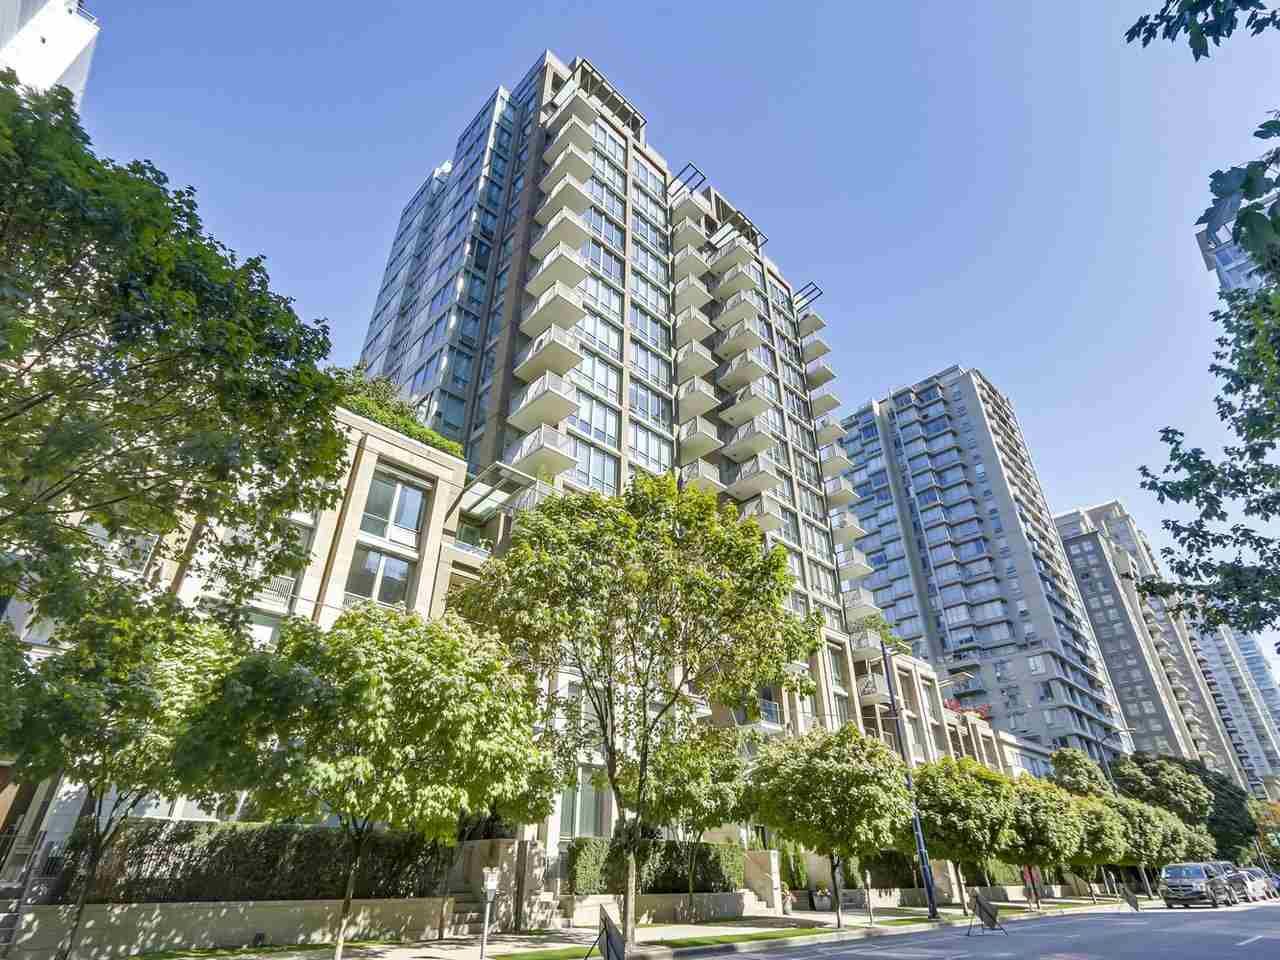 Main Photo: 1706 1055 RICHARDS STREET in Vancouver: Downtown VW Condo for sale (Vancouver West)  : MLS®# R2293878